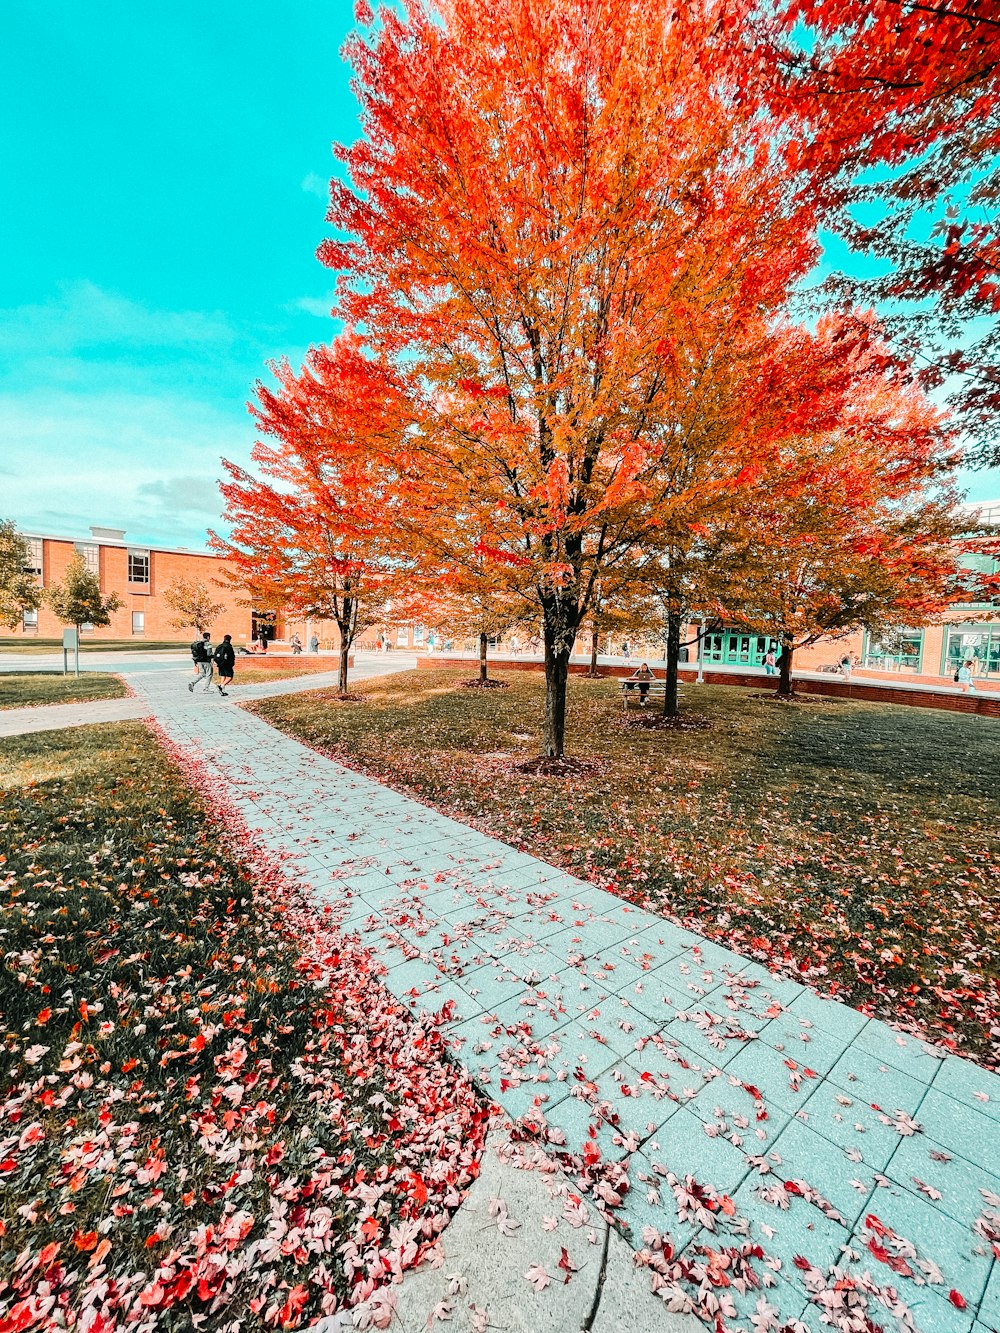 a pathway in the middle of a park with red leaves on the ground